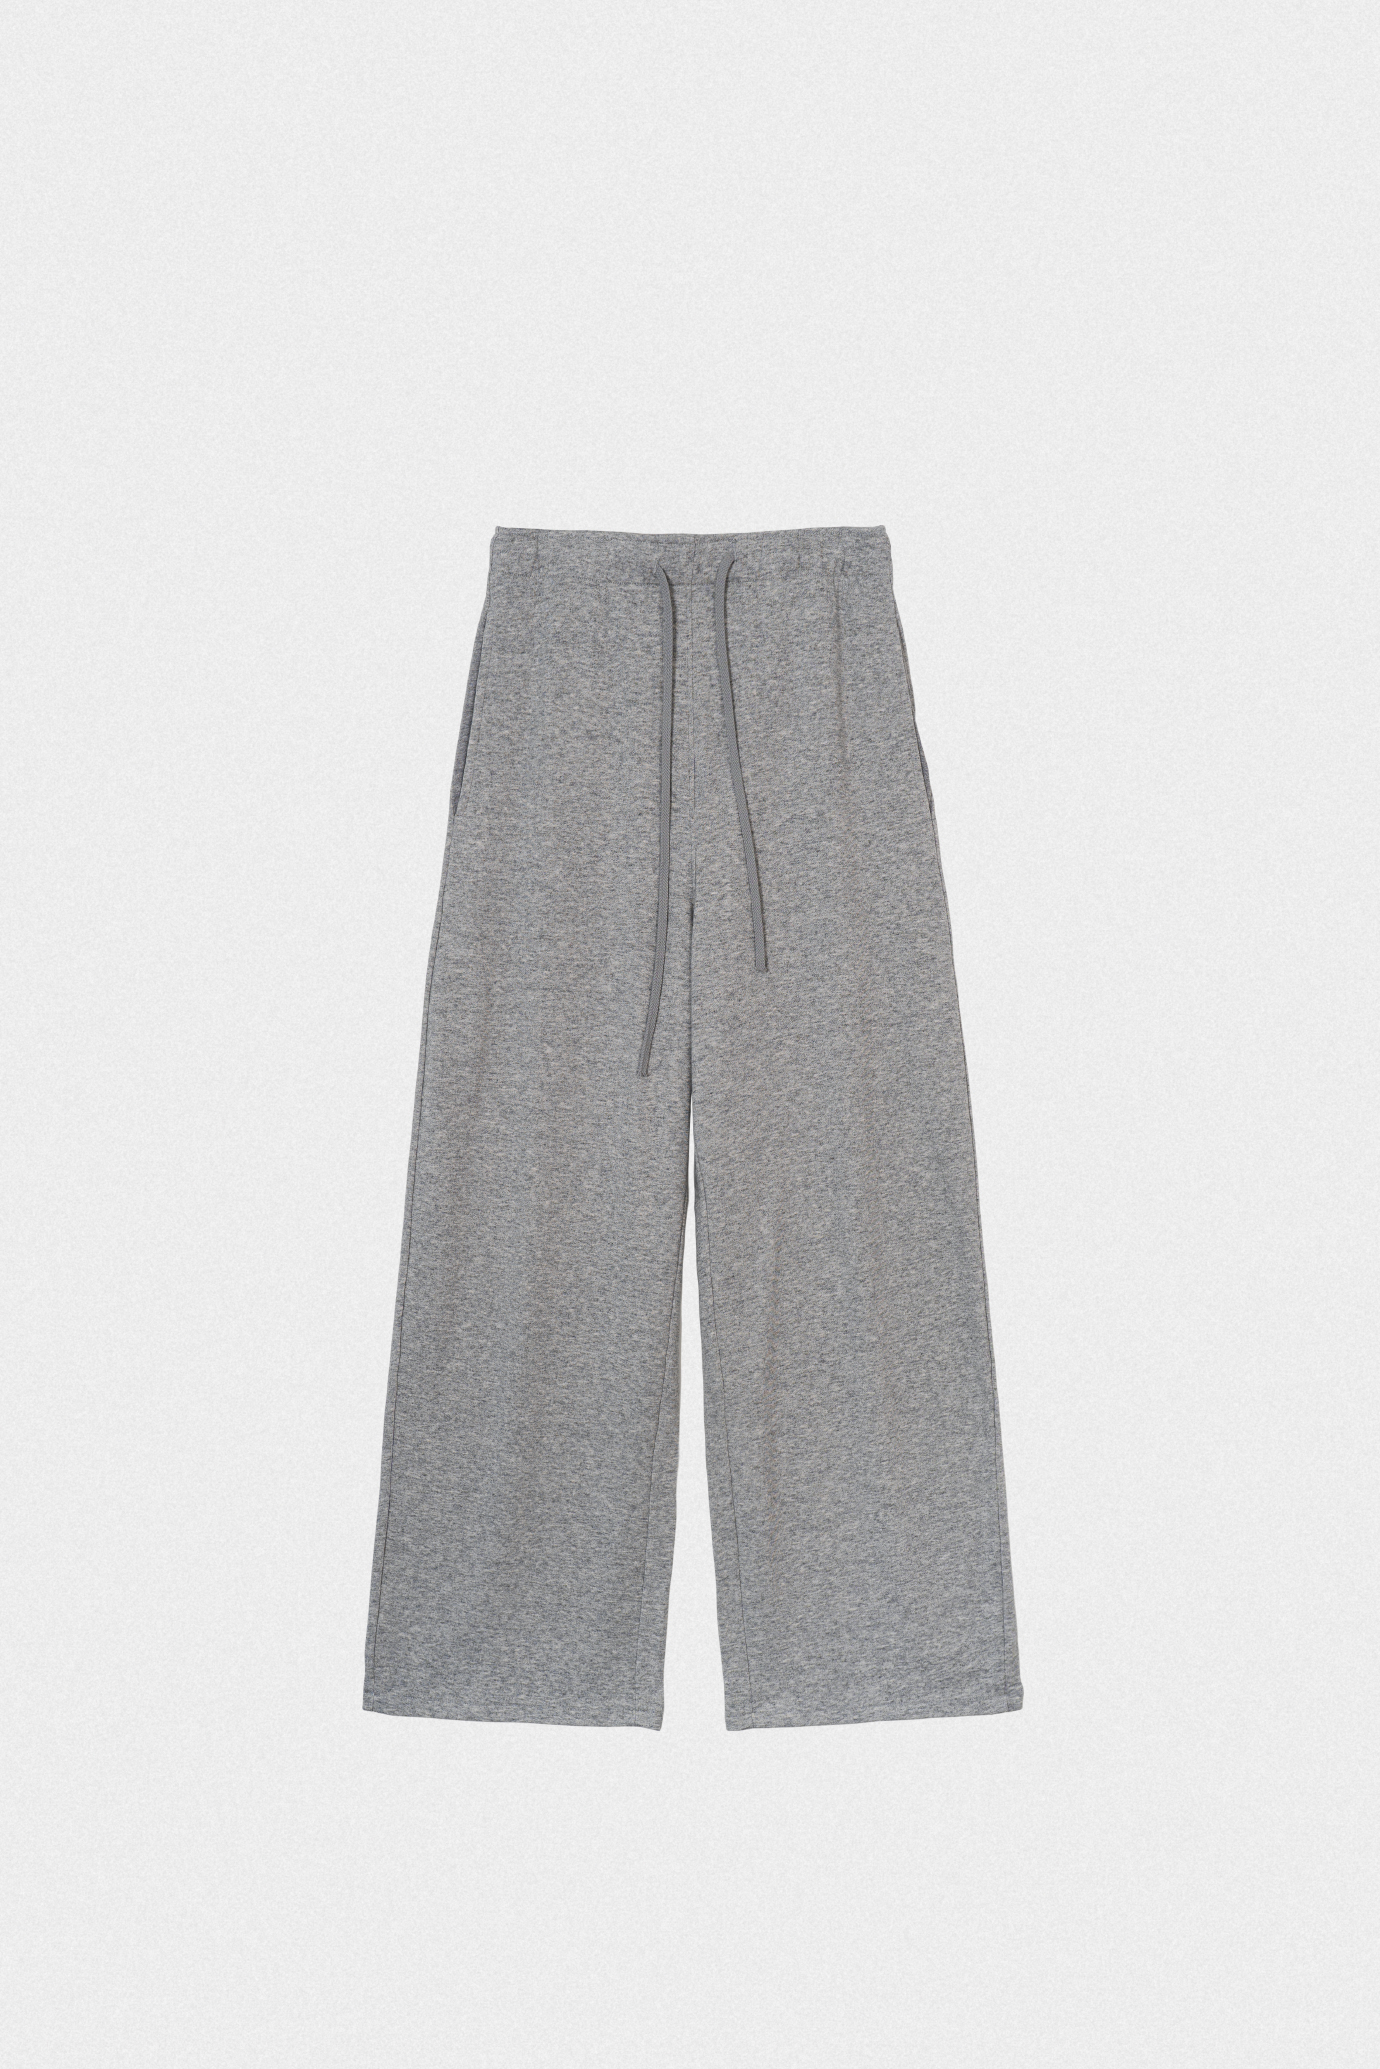 20090_French Terry Sweatpants [td]